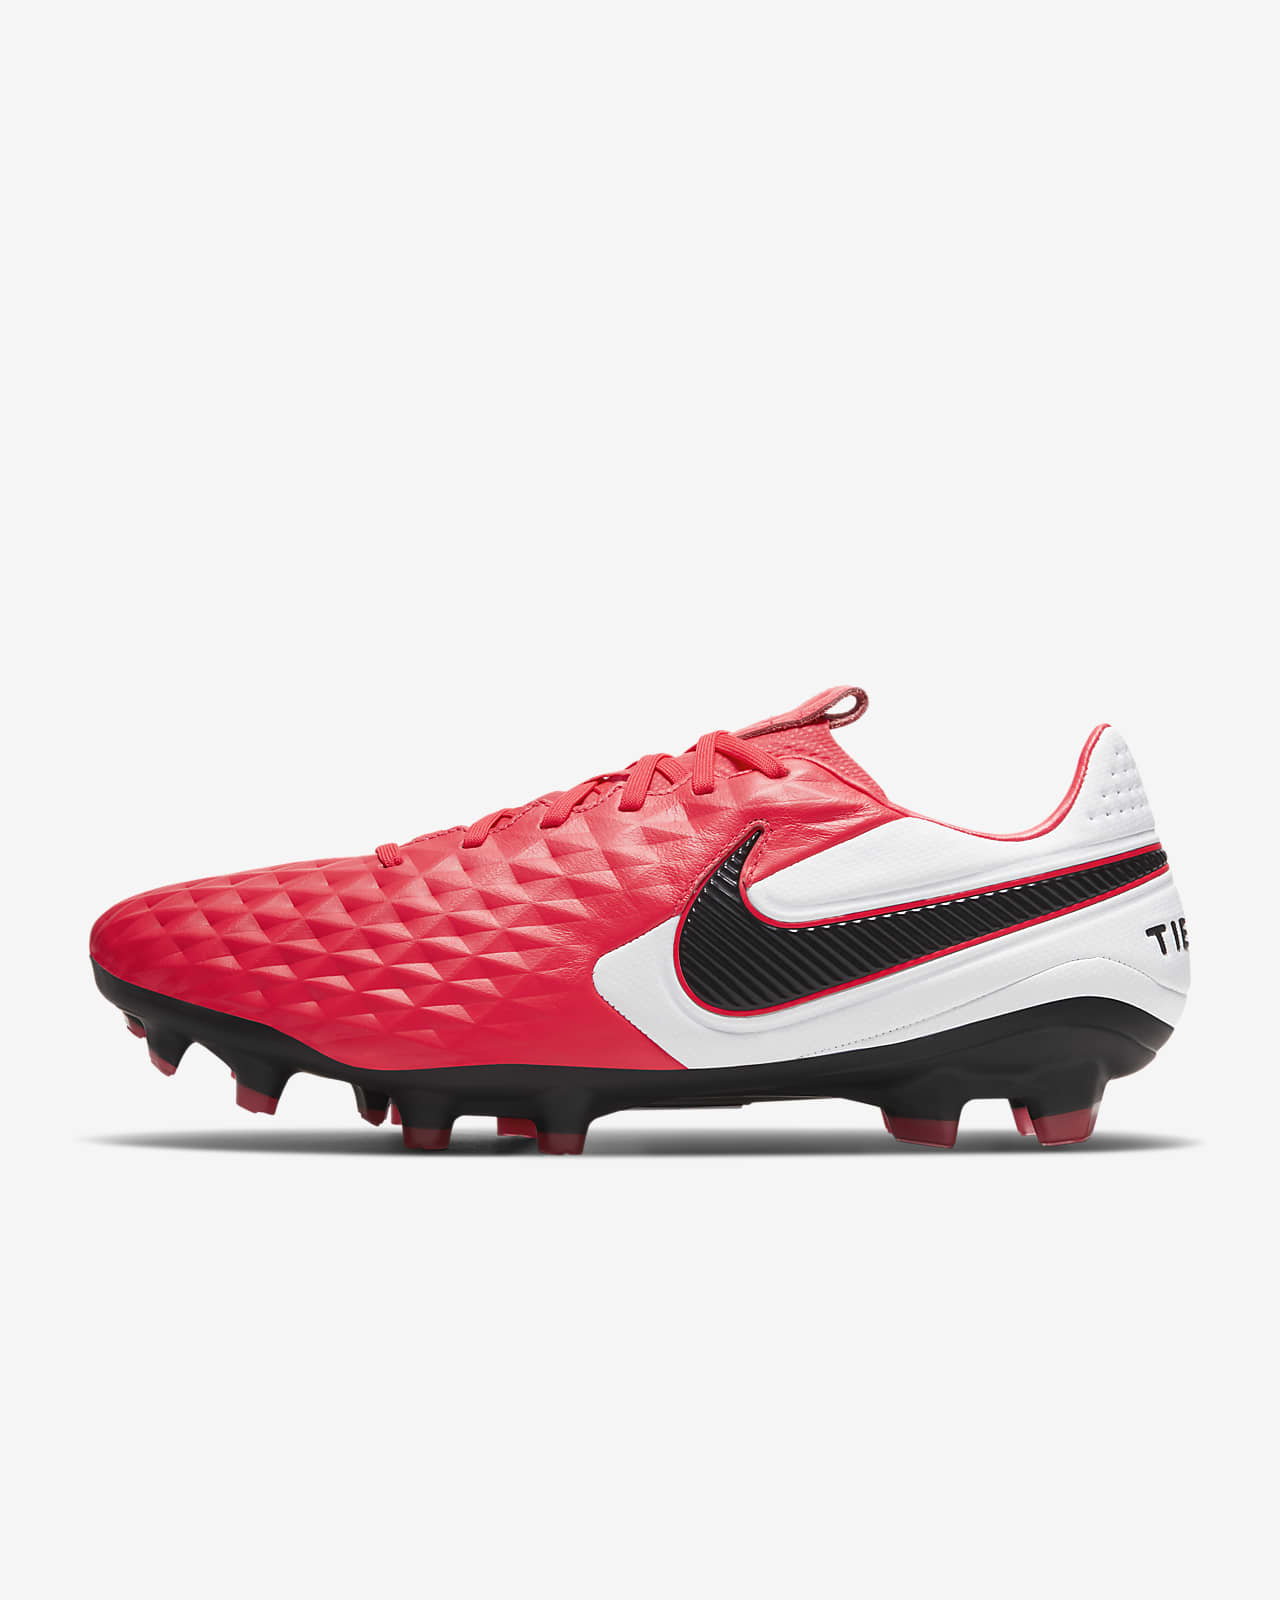 Nike Tiempo Legend 8 Pro FG Firm-Ground Football Boot. Nike DK